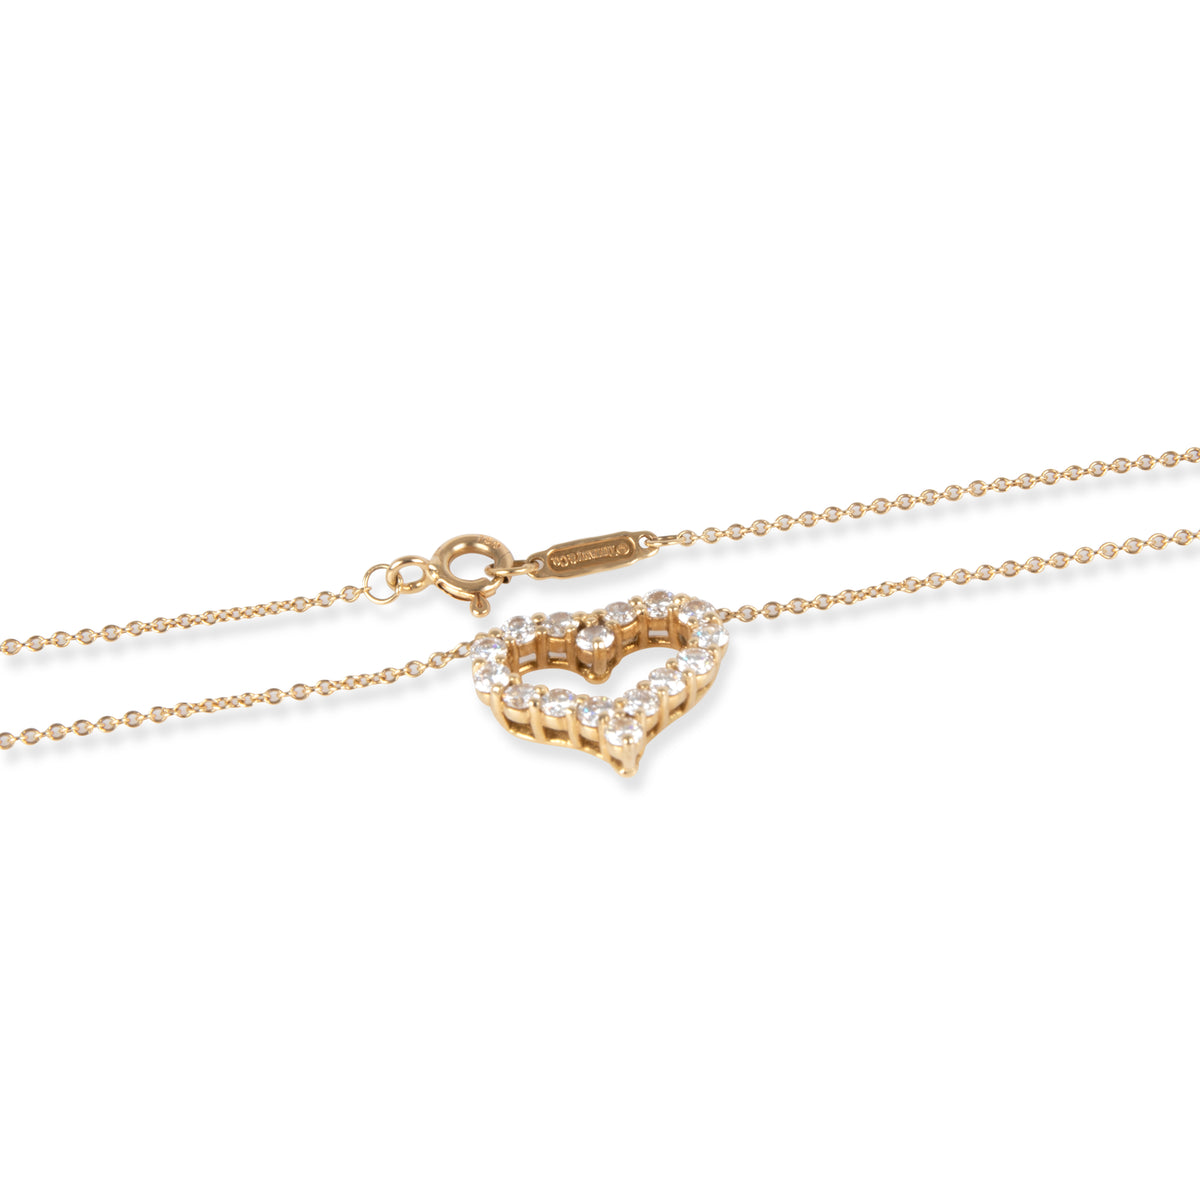 Tiffany & Co. Diamond Heart Necklace in 18K Yellow Gold 0.70 CTW